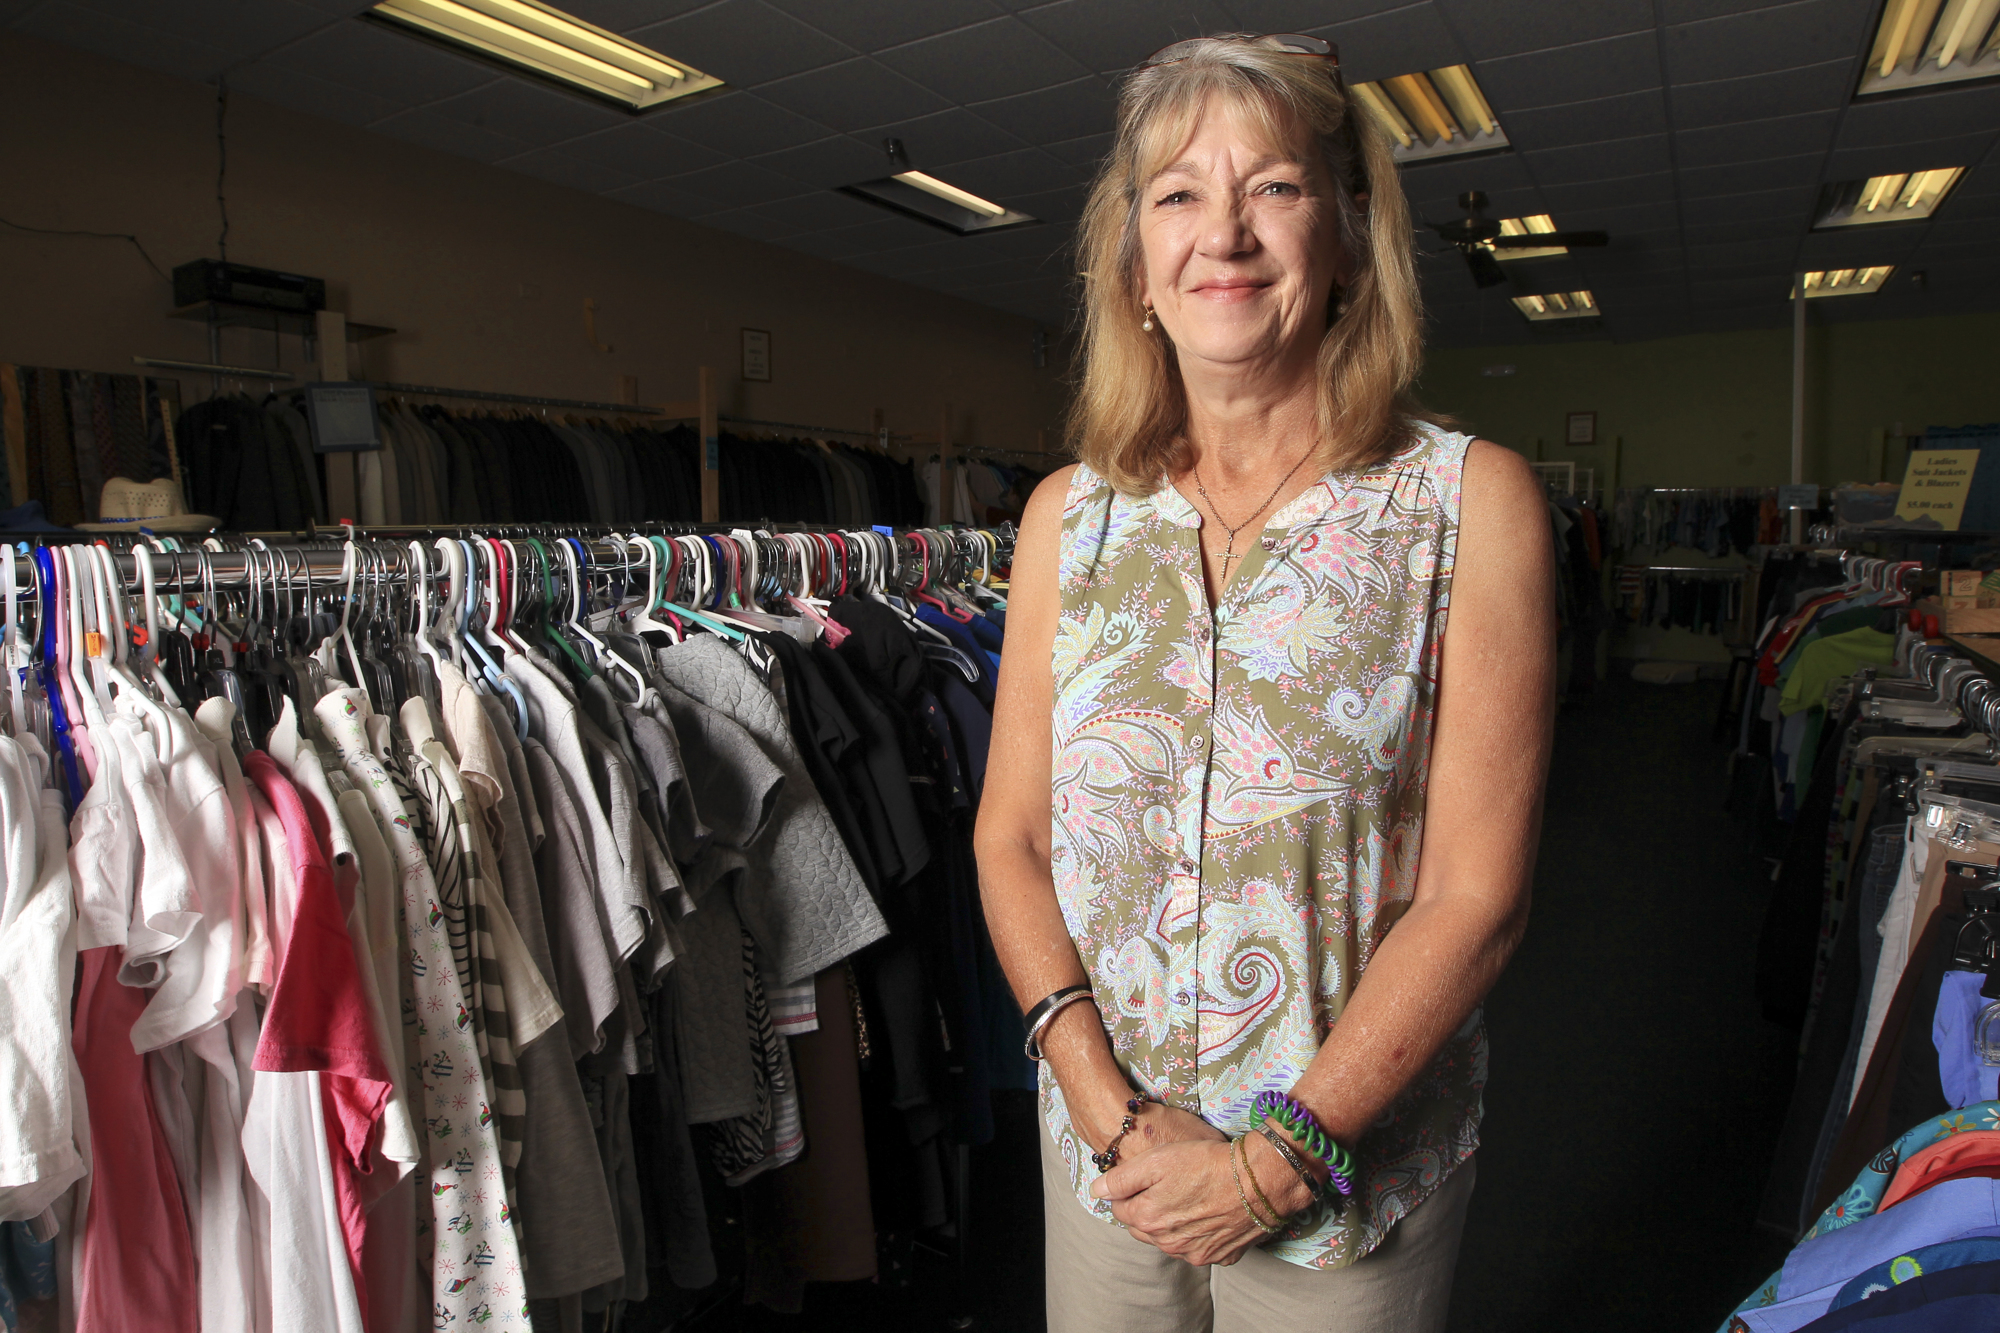 Colleen Goldrick currently works at the New Beginning Thrift store in Winter Garden located at 14041 W. Colonial Drive. (Photo by Troy Herring)